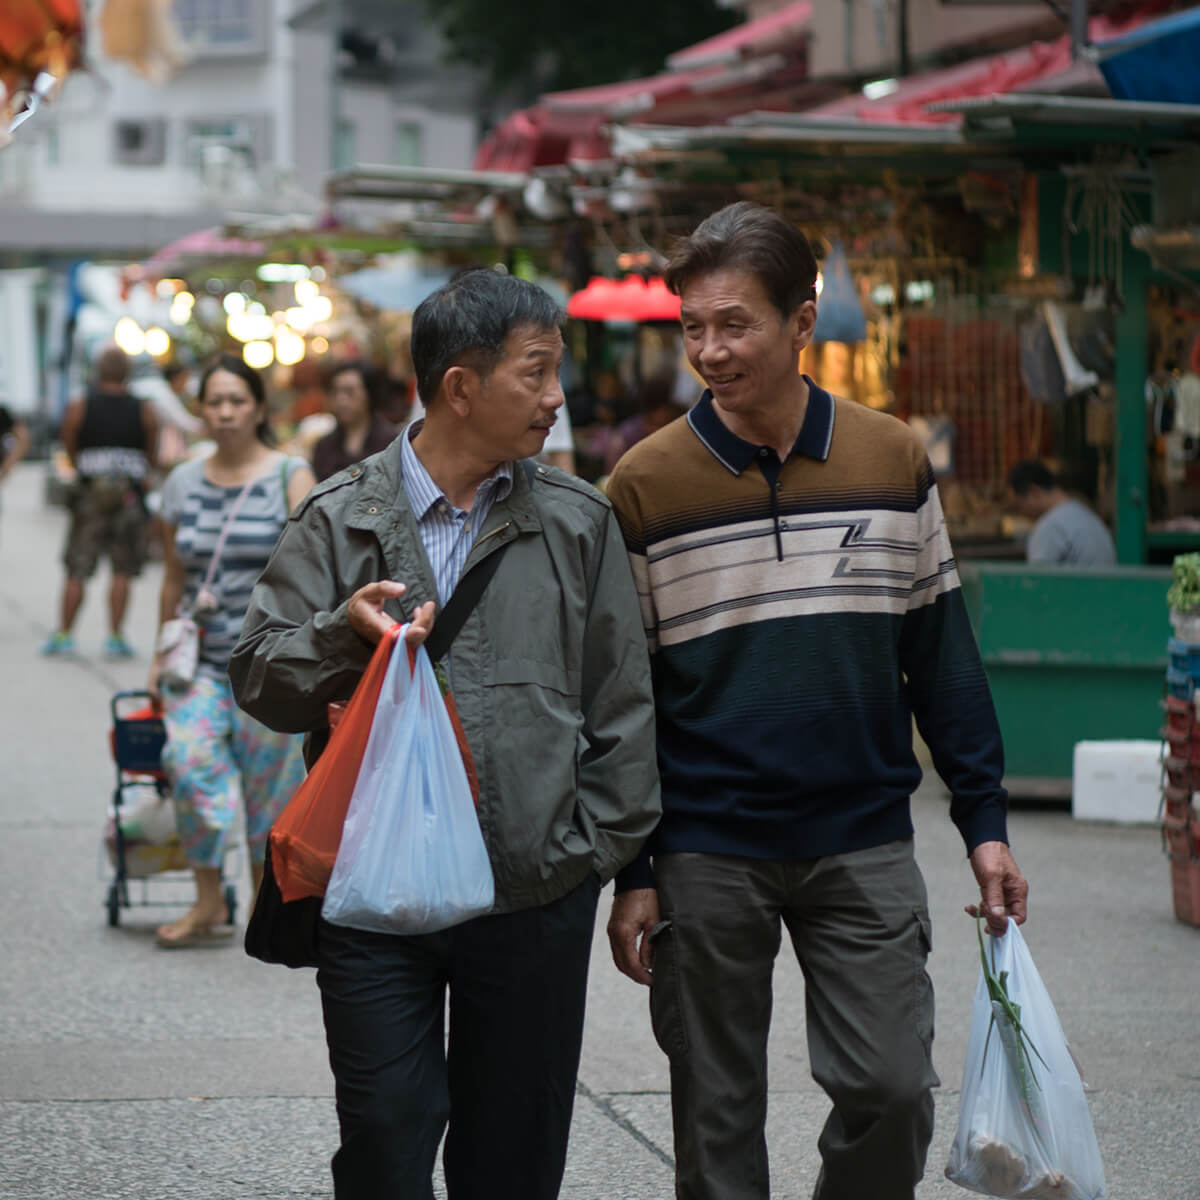 Two men holding shopping bags chat and walk through an outdoor marketplace.